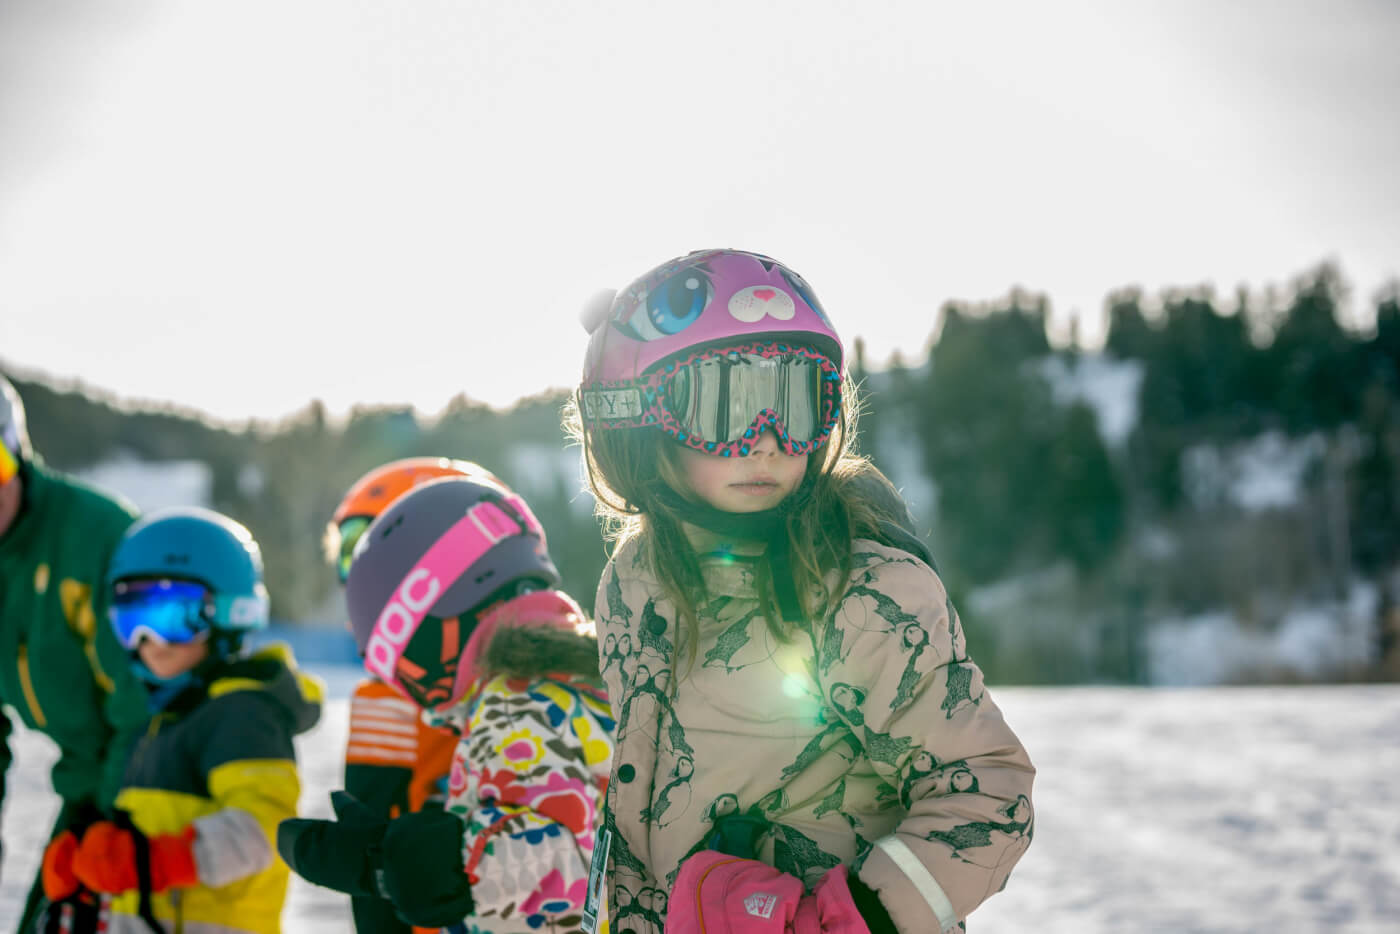 THE BEST SKI SCHOOLS & FAMILY-FRIENDLY MOUNTAINS ON THE IKON PASS